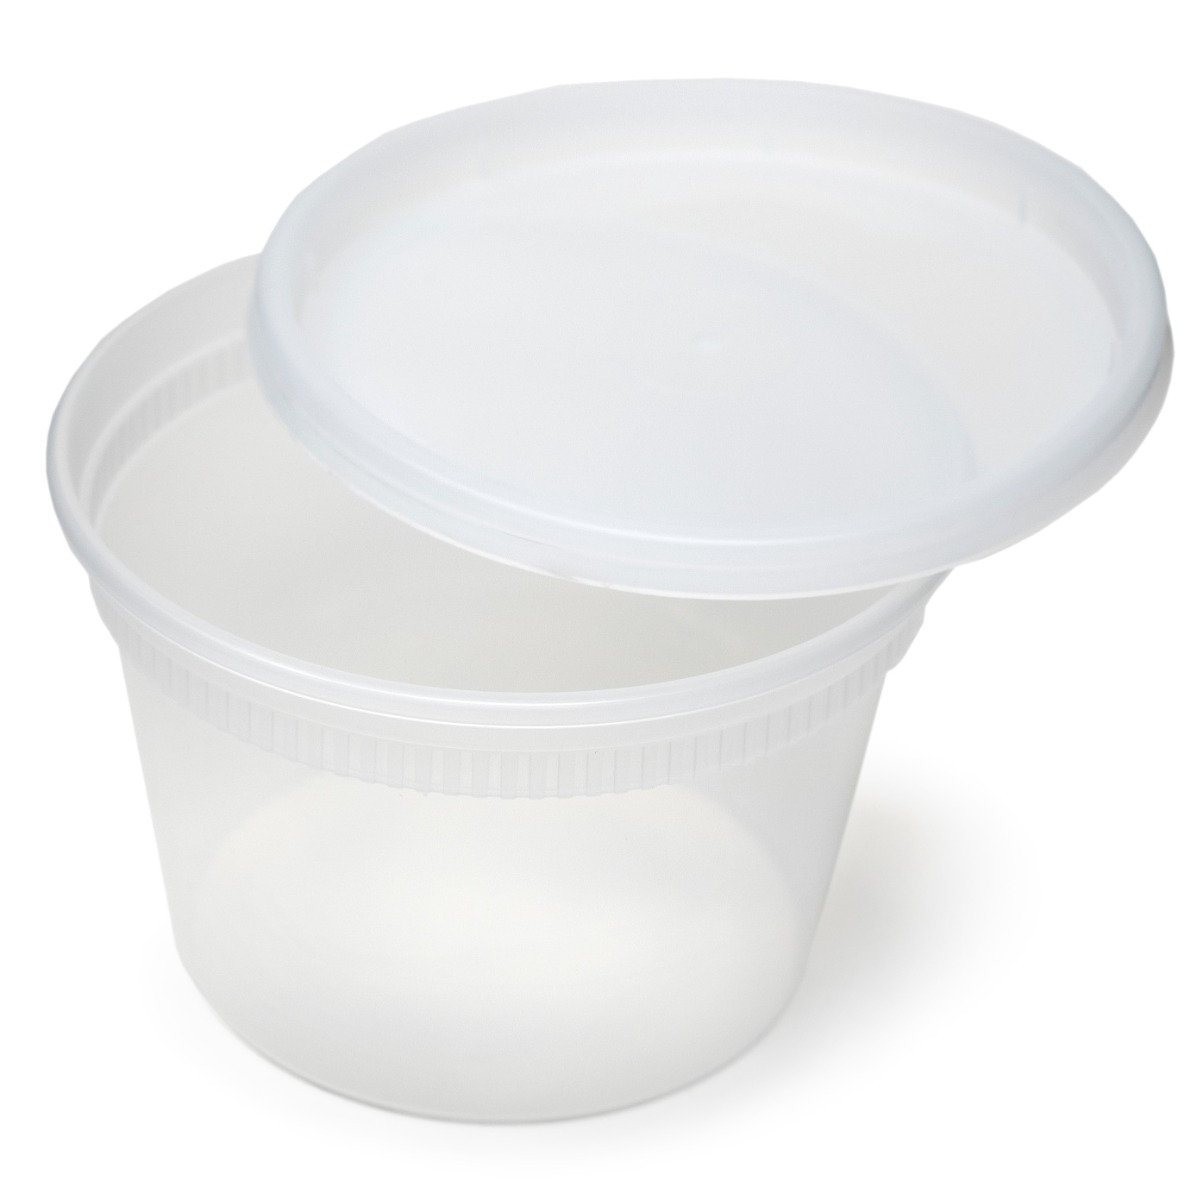 Yanco DP-2336WT 3 Compartment Disposable Container w/ Lid